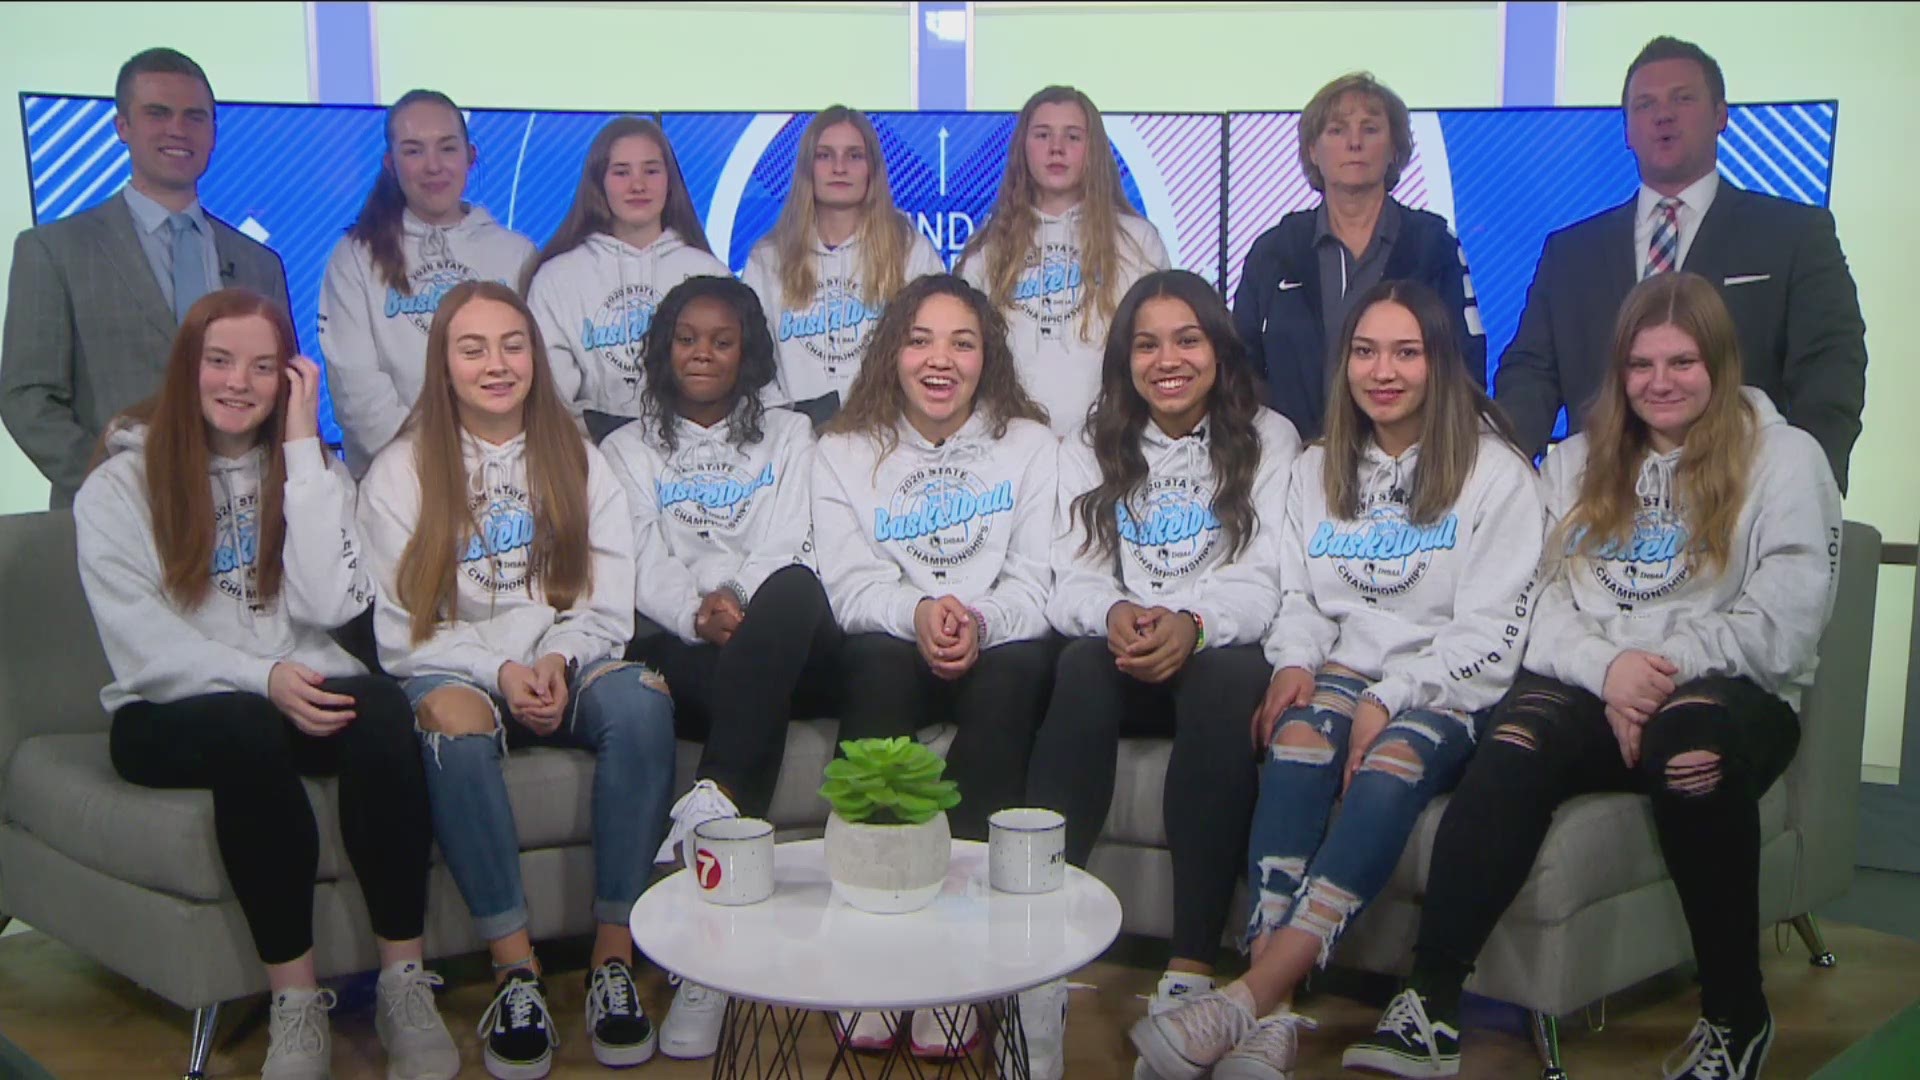 The Mountain View Mavericks girls basketball team joined Jay and Will on set after winning the 5A state championship